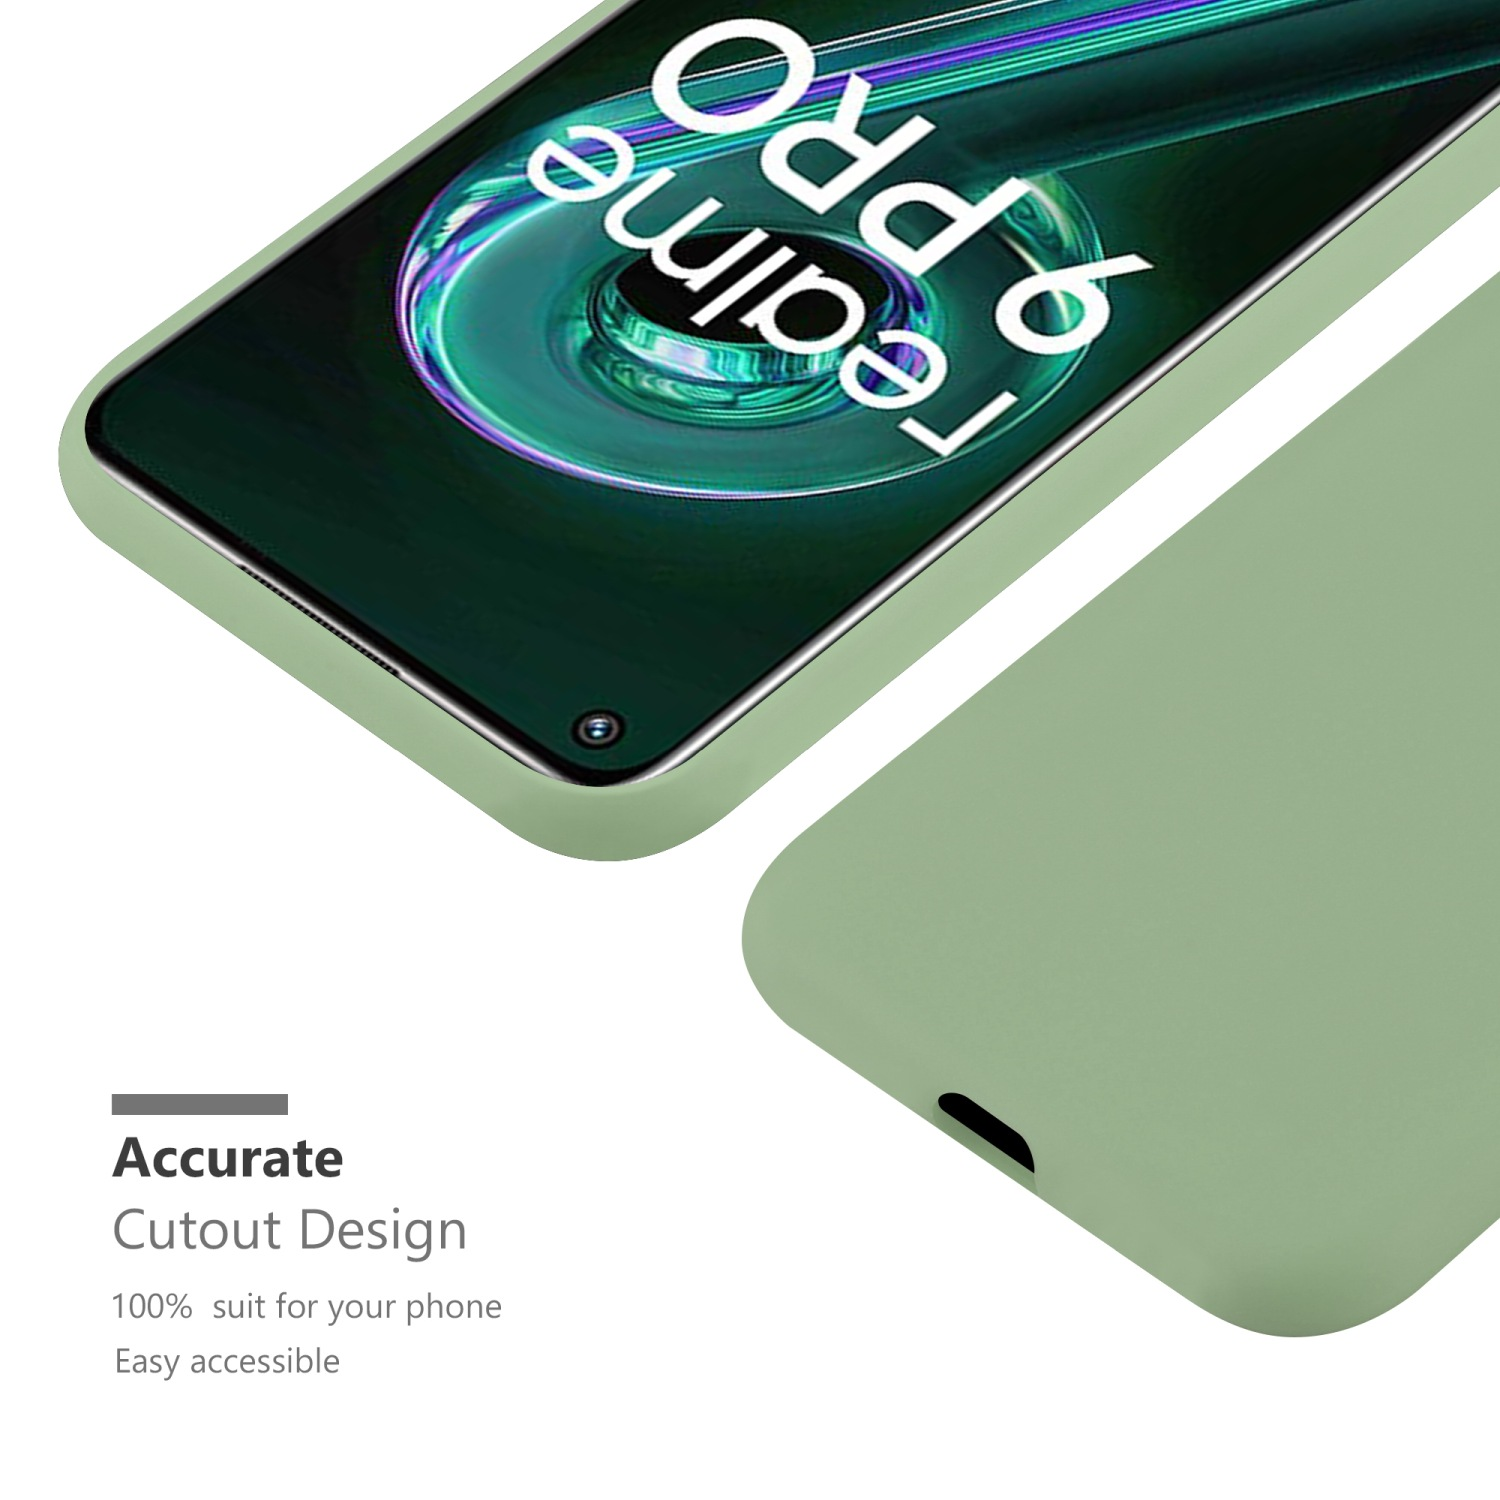 2 / GRÜN 5G / CANDY PASTELL LITE V25 Style, / Backcover, 9 CADORABO / TPU im OnePlus PRO Realme, Candy Nord Hülle CE 5G, Q5 9